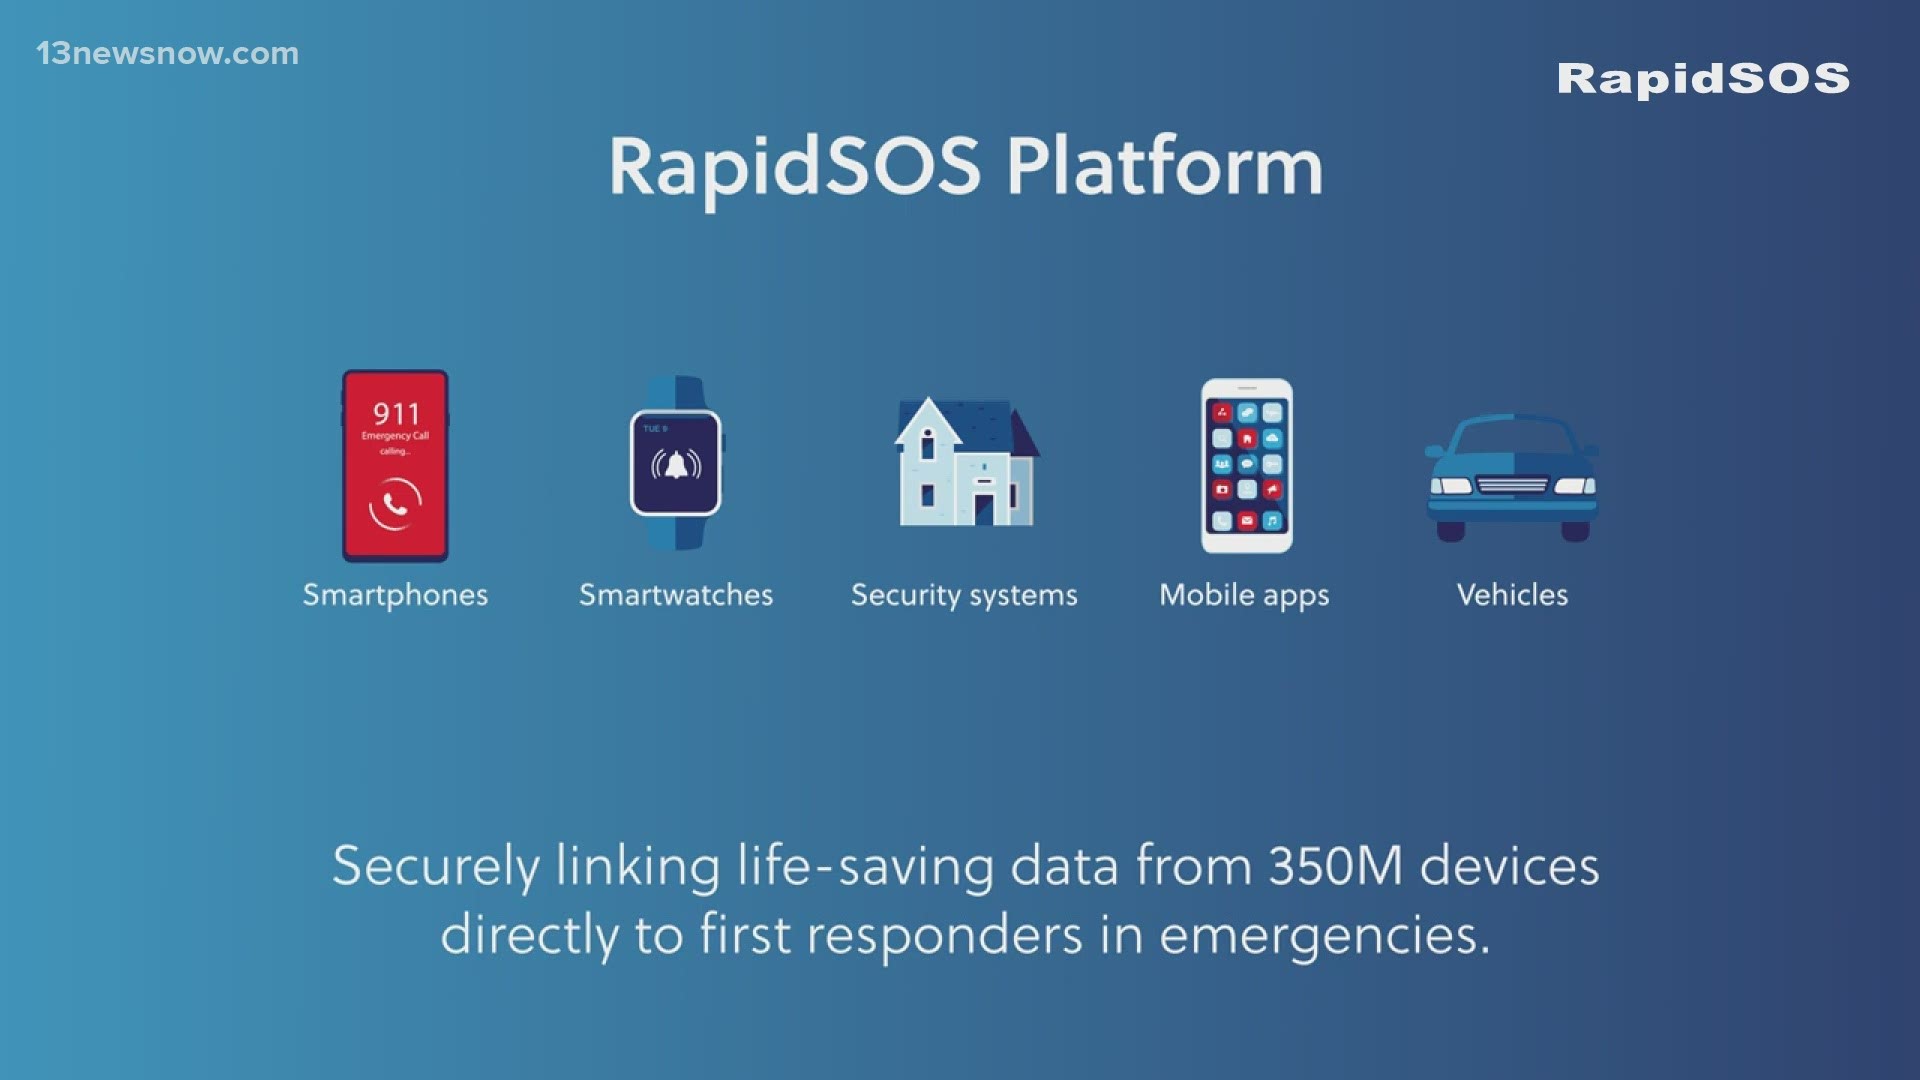 The Newport News Police Department has partnered with RapidSOS to connect life-saving data with 911 dispatchers and first responders.